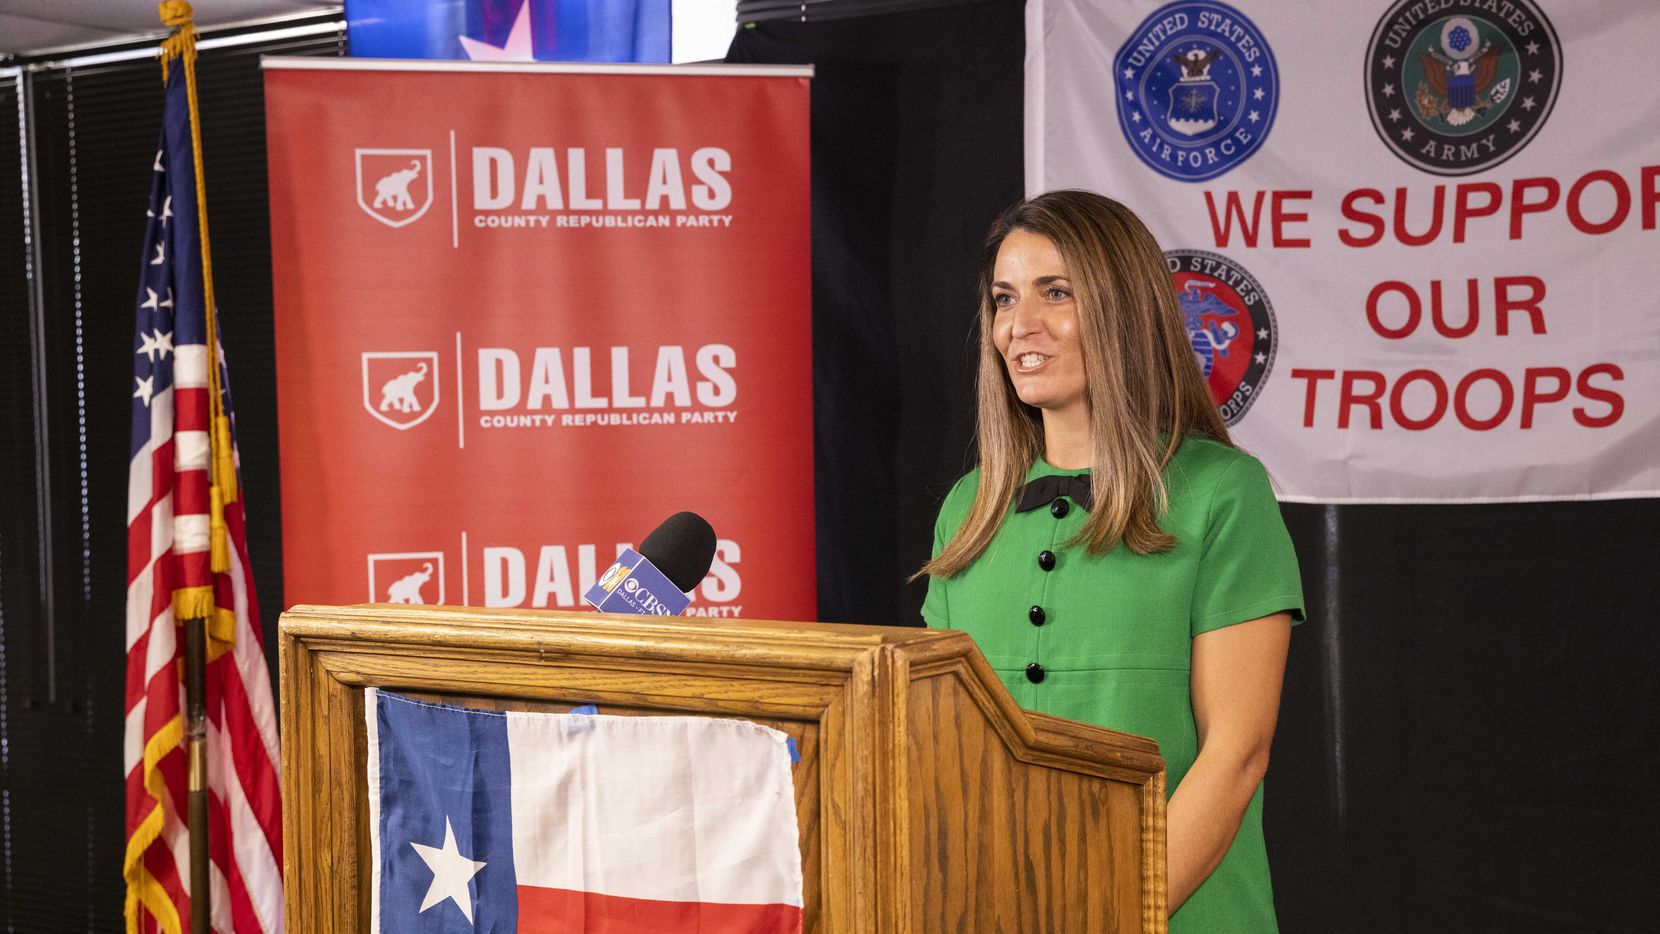 Lauren Davis, candidate for Dallas County Judge, speaks during a press event introducing...